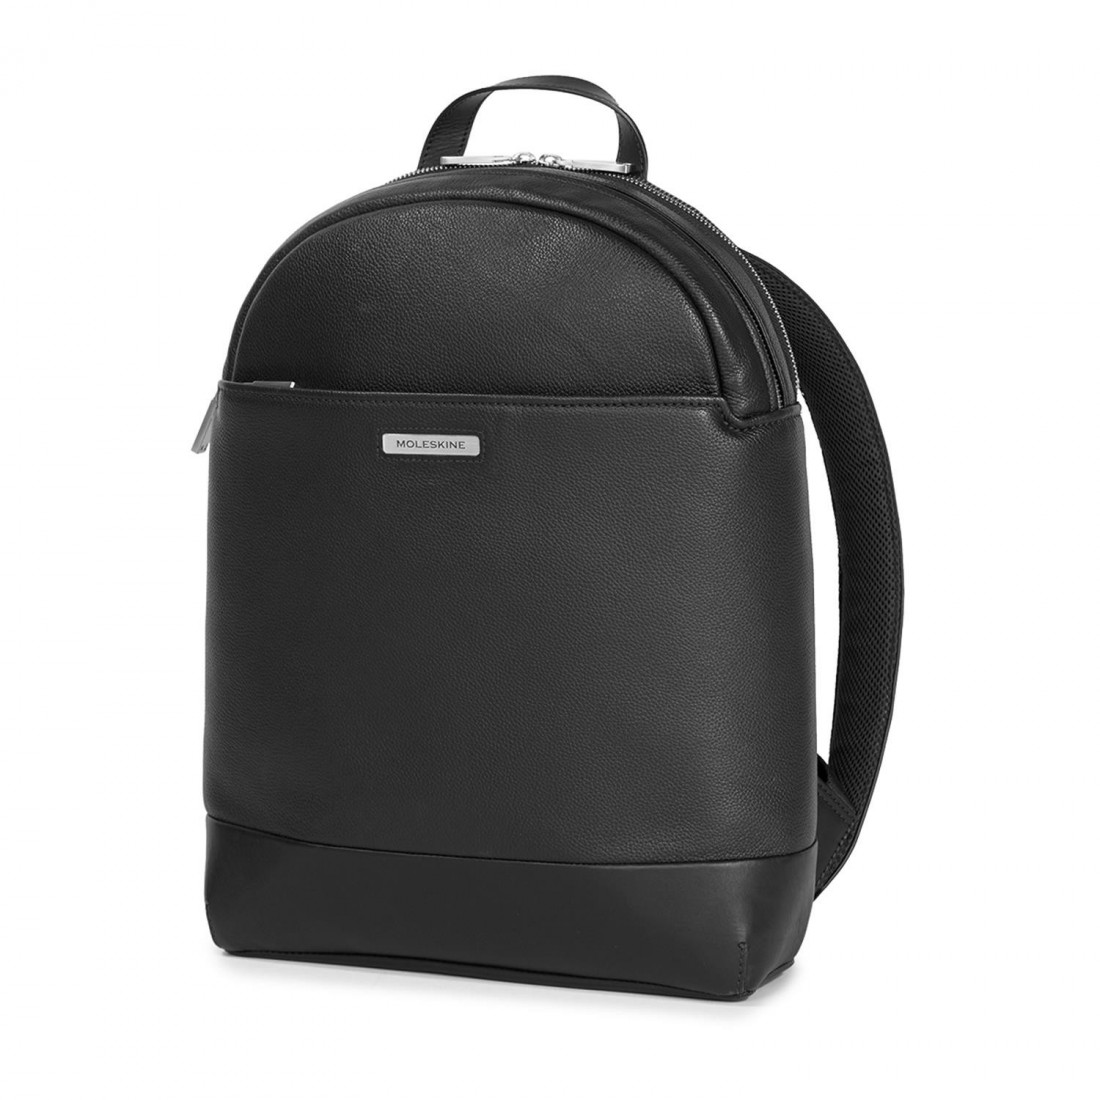 MOLESKINE CLASSIC MATCH SMALL ROUND TOP BACKPACK - BLACK